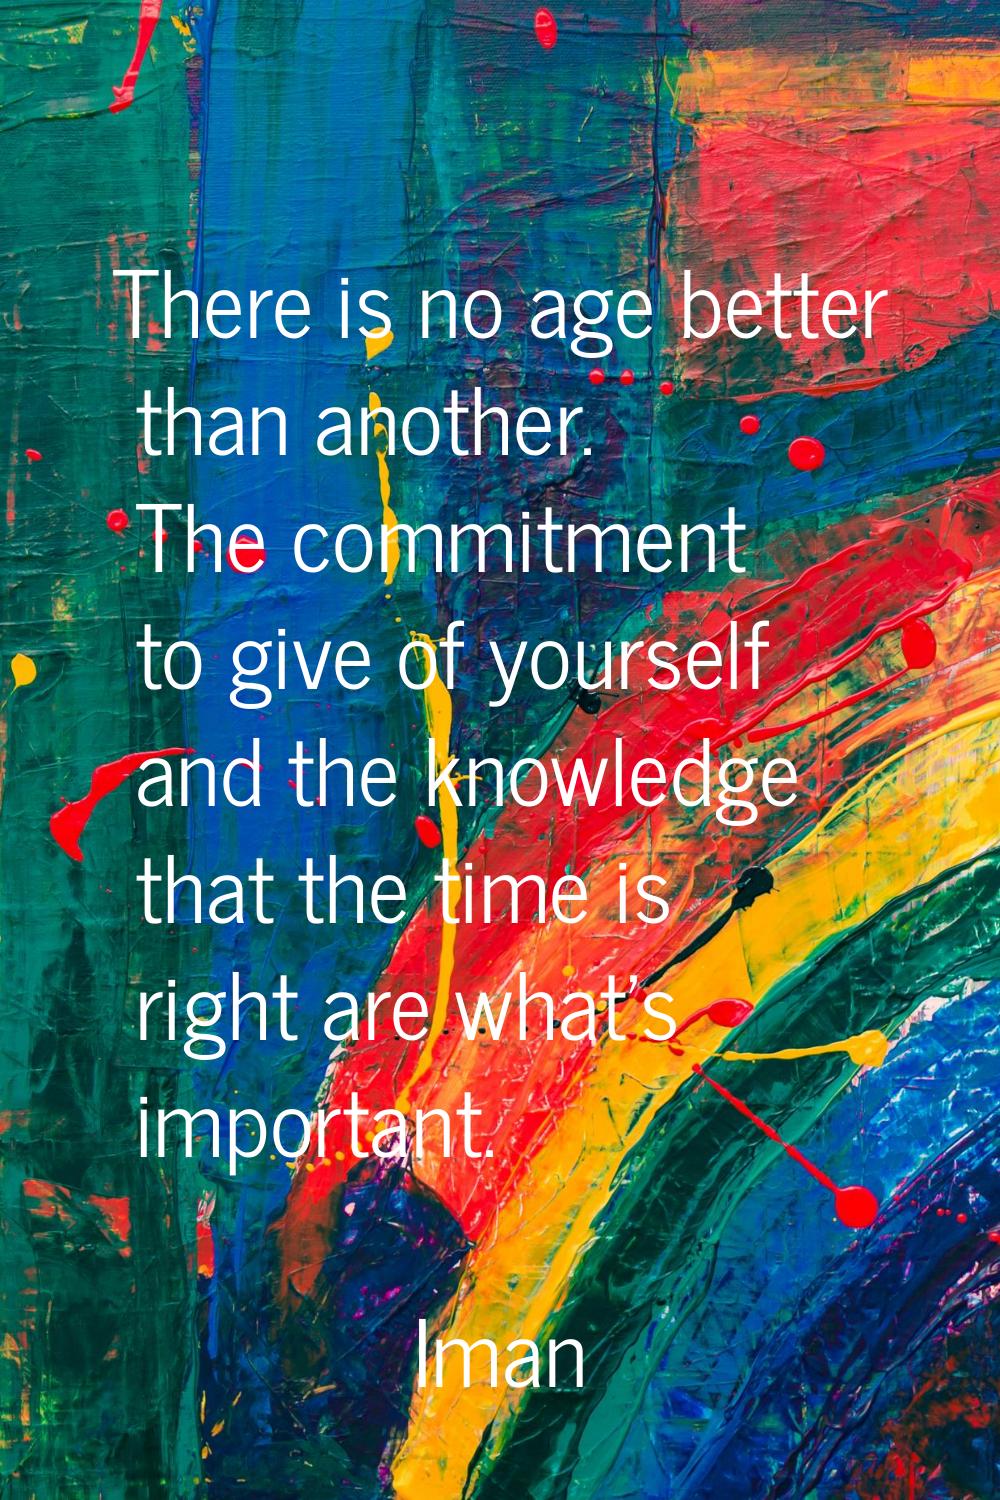 There is no age better than another. The commitment to give of yourself and the knowledge that the 